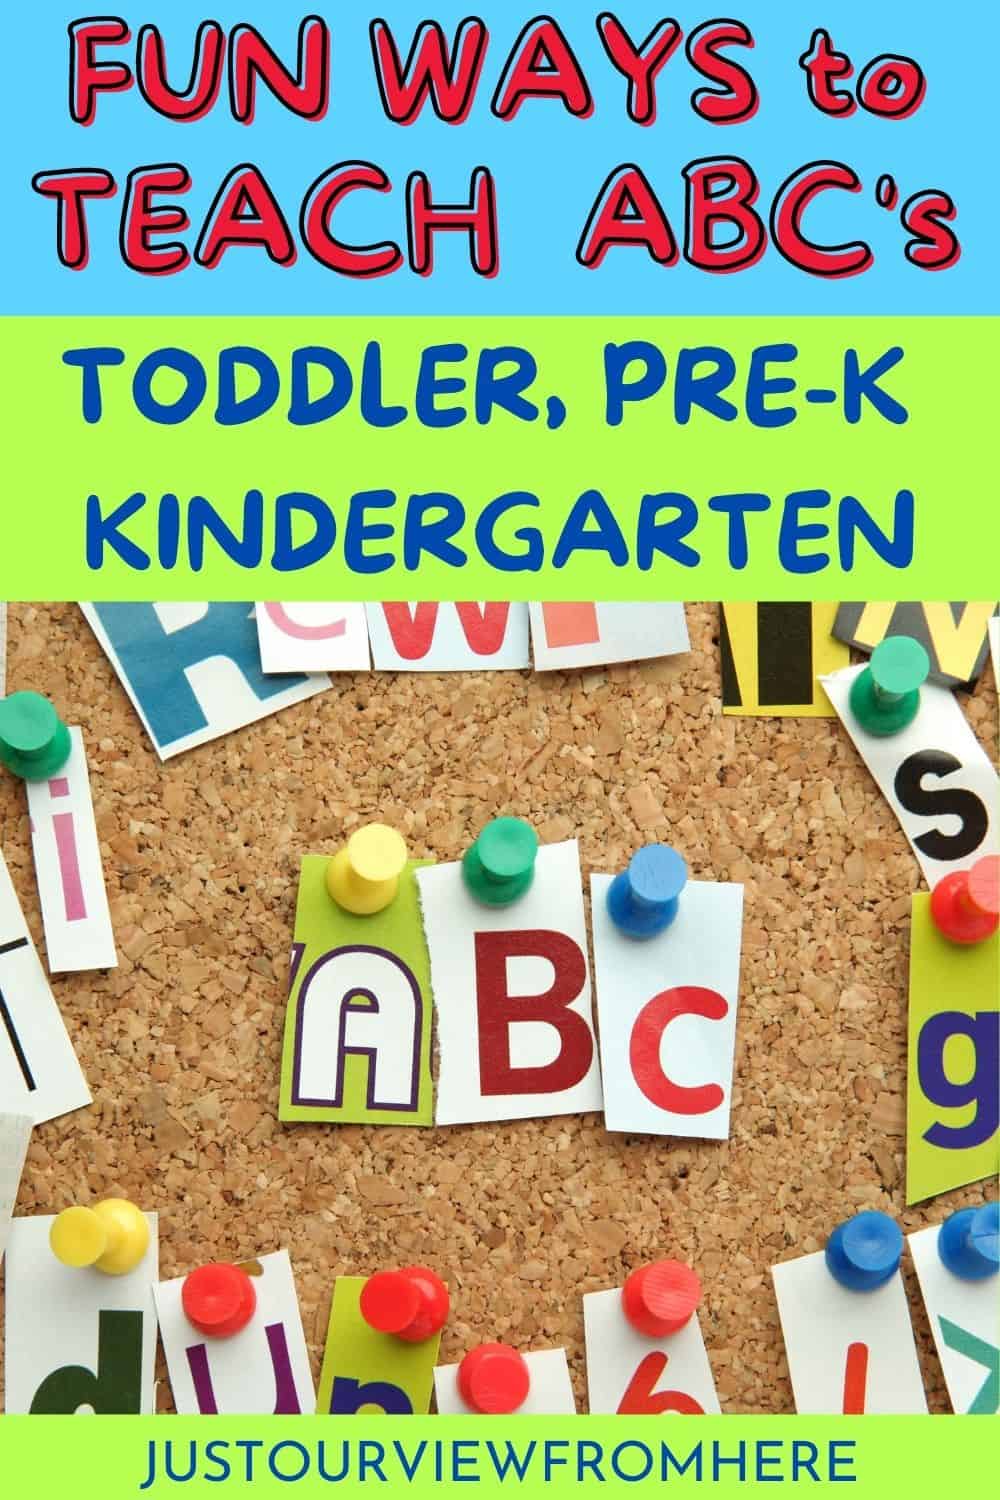 FUN WAYS TO TEACH ABCS, TODDLER, PRE-K AND KINDERGARTEN LEARNING